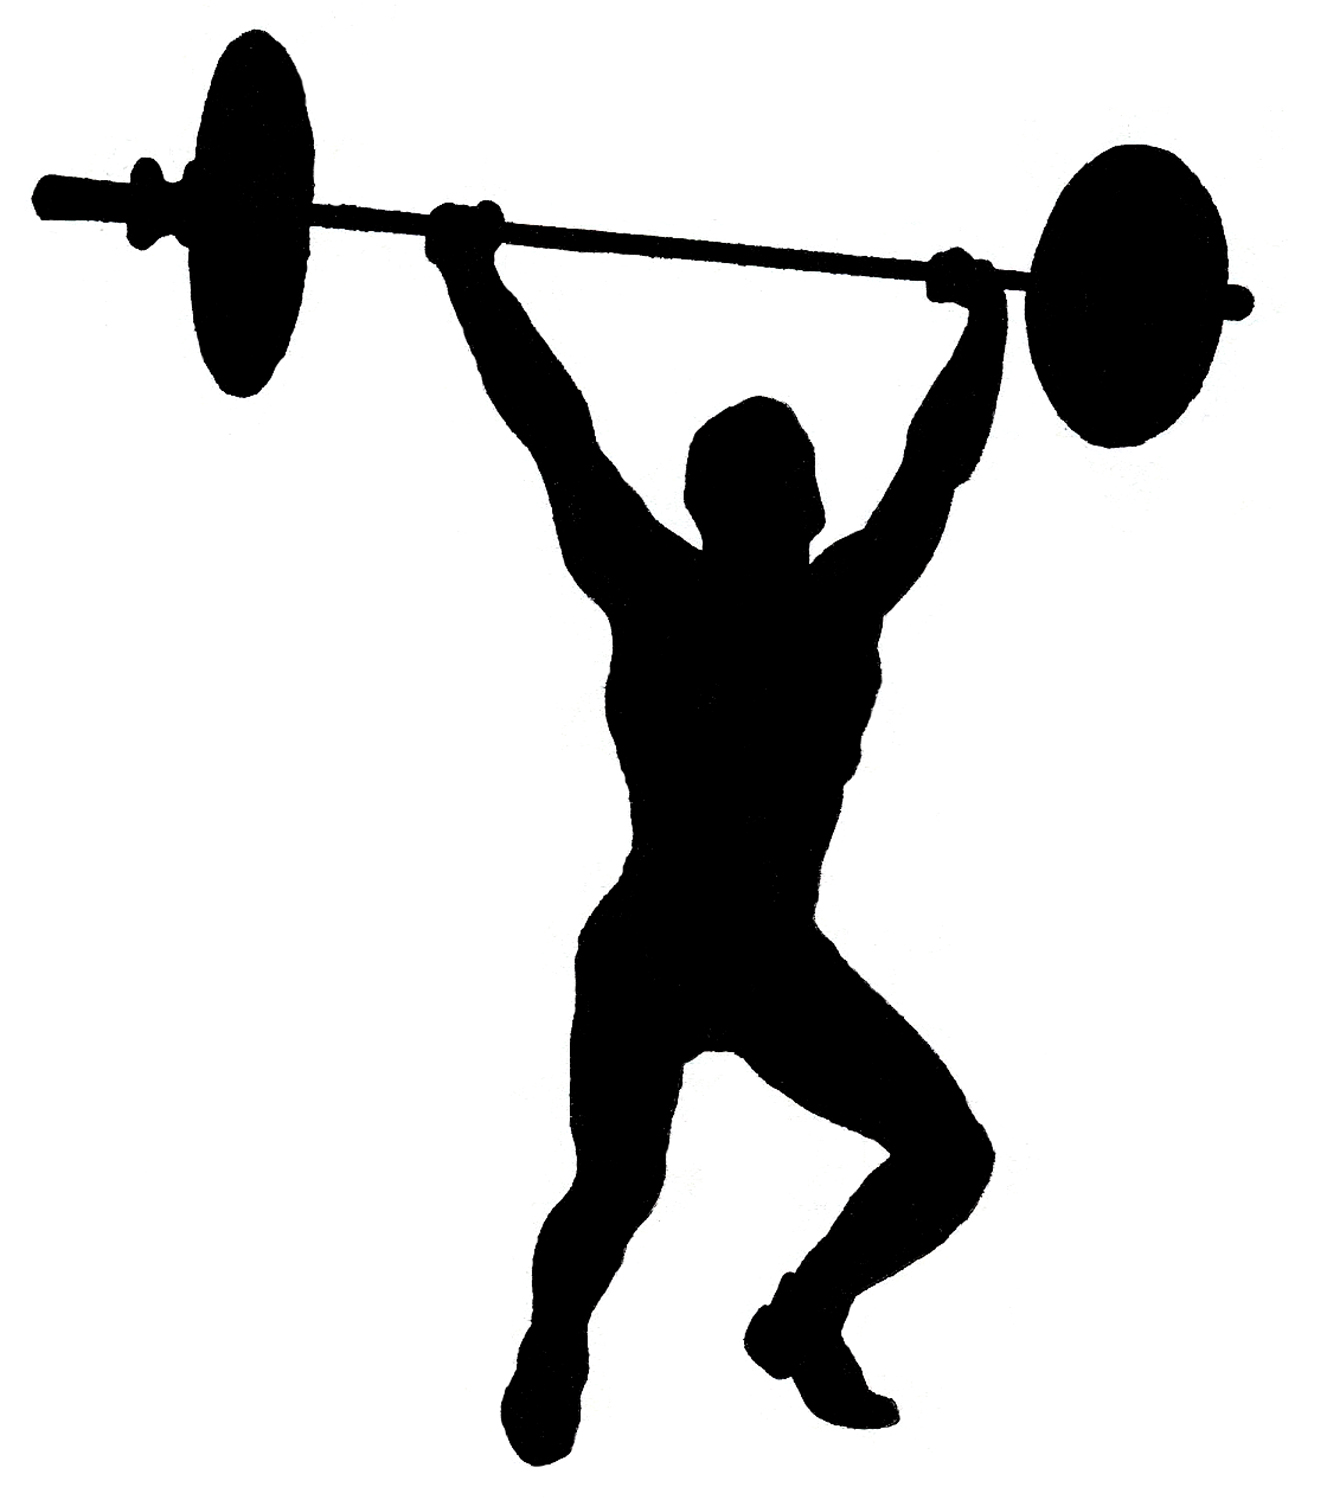 Sports Silhouette - ClipArt Best